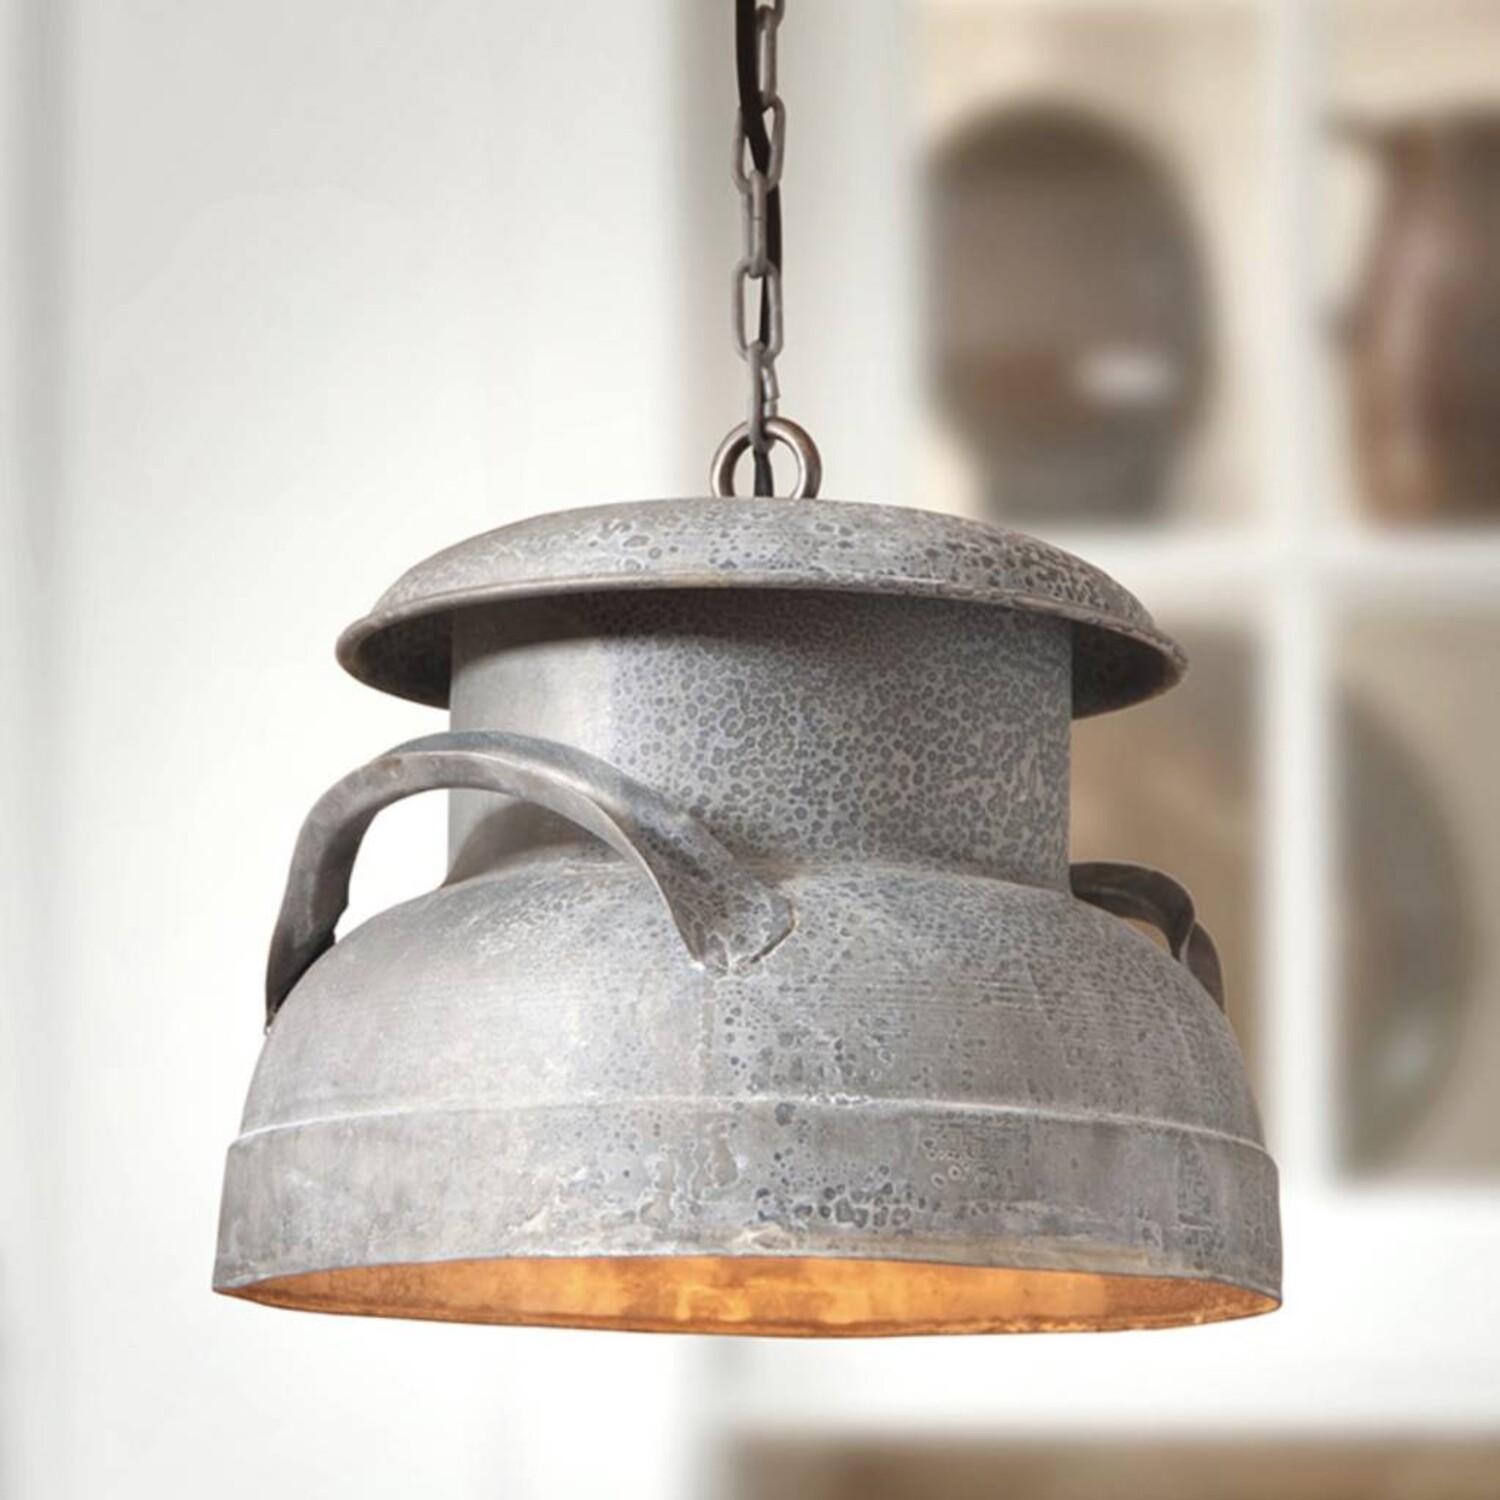 Irvin's Tinware  Rustic Country Home Decor and Lighting